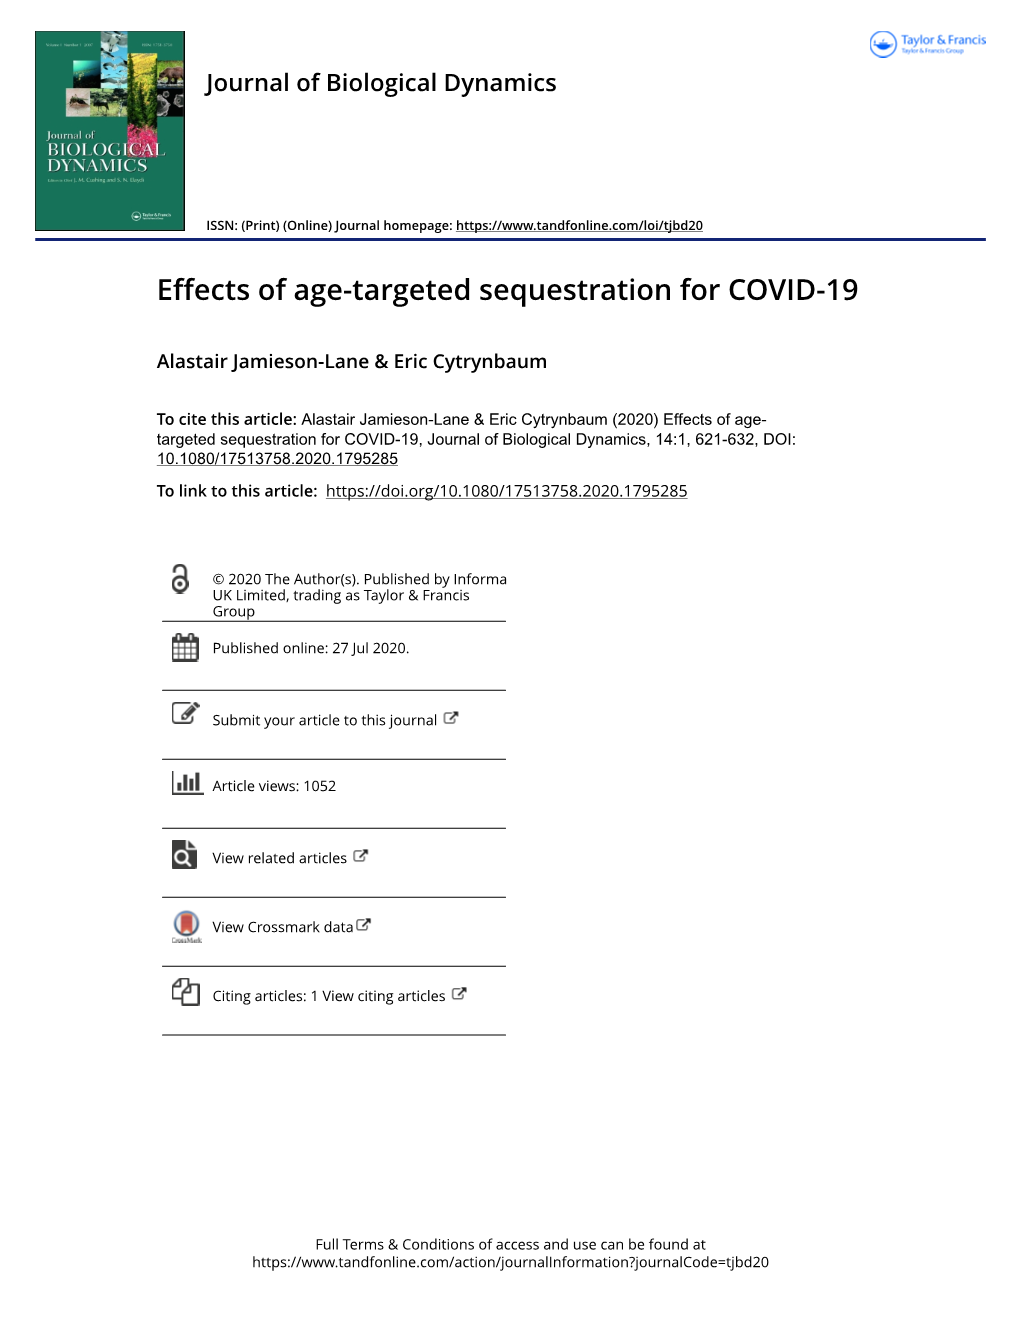 Effects of Age-Targeted Sequestration for COVID-19